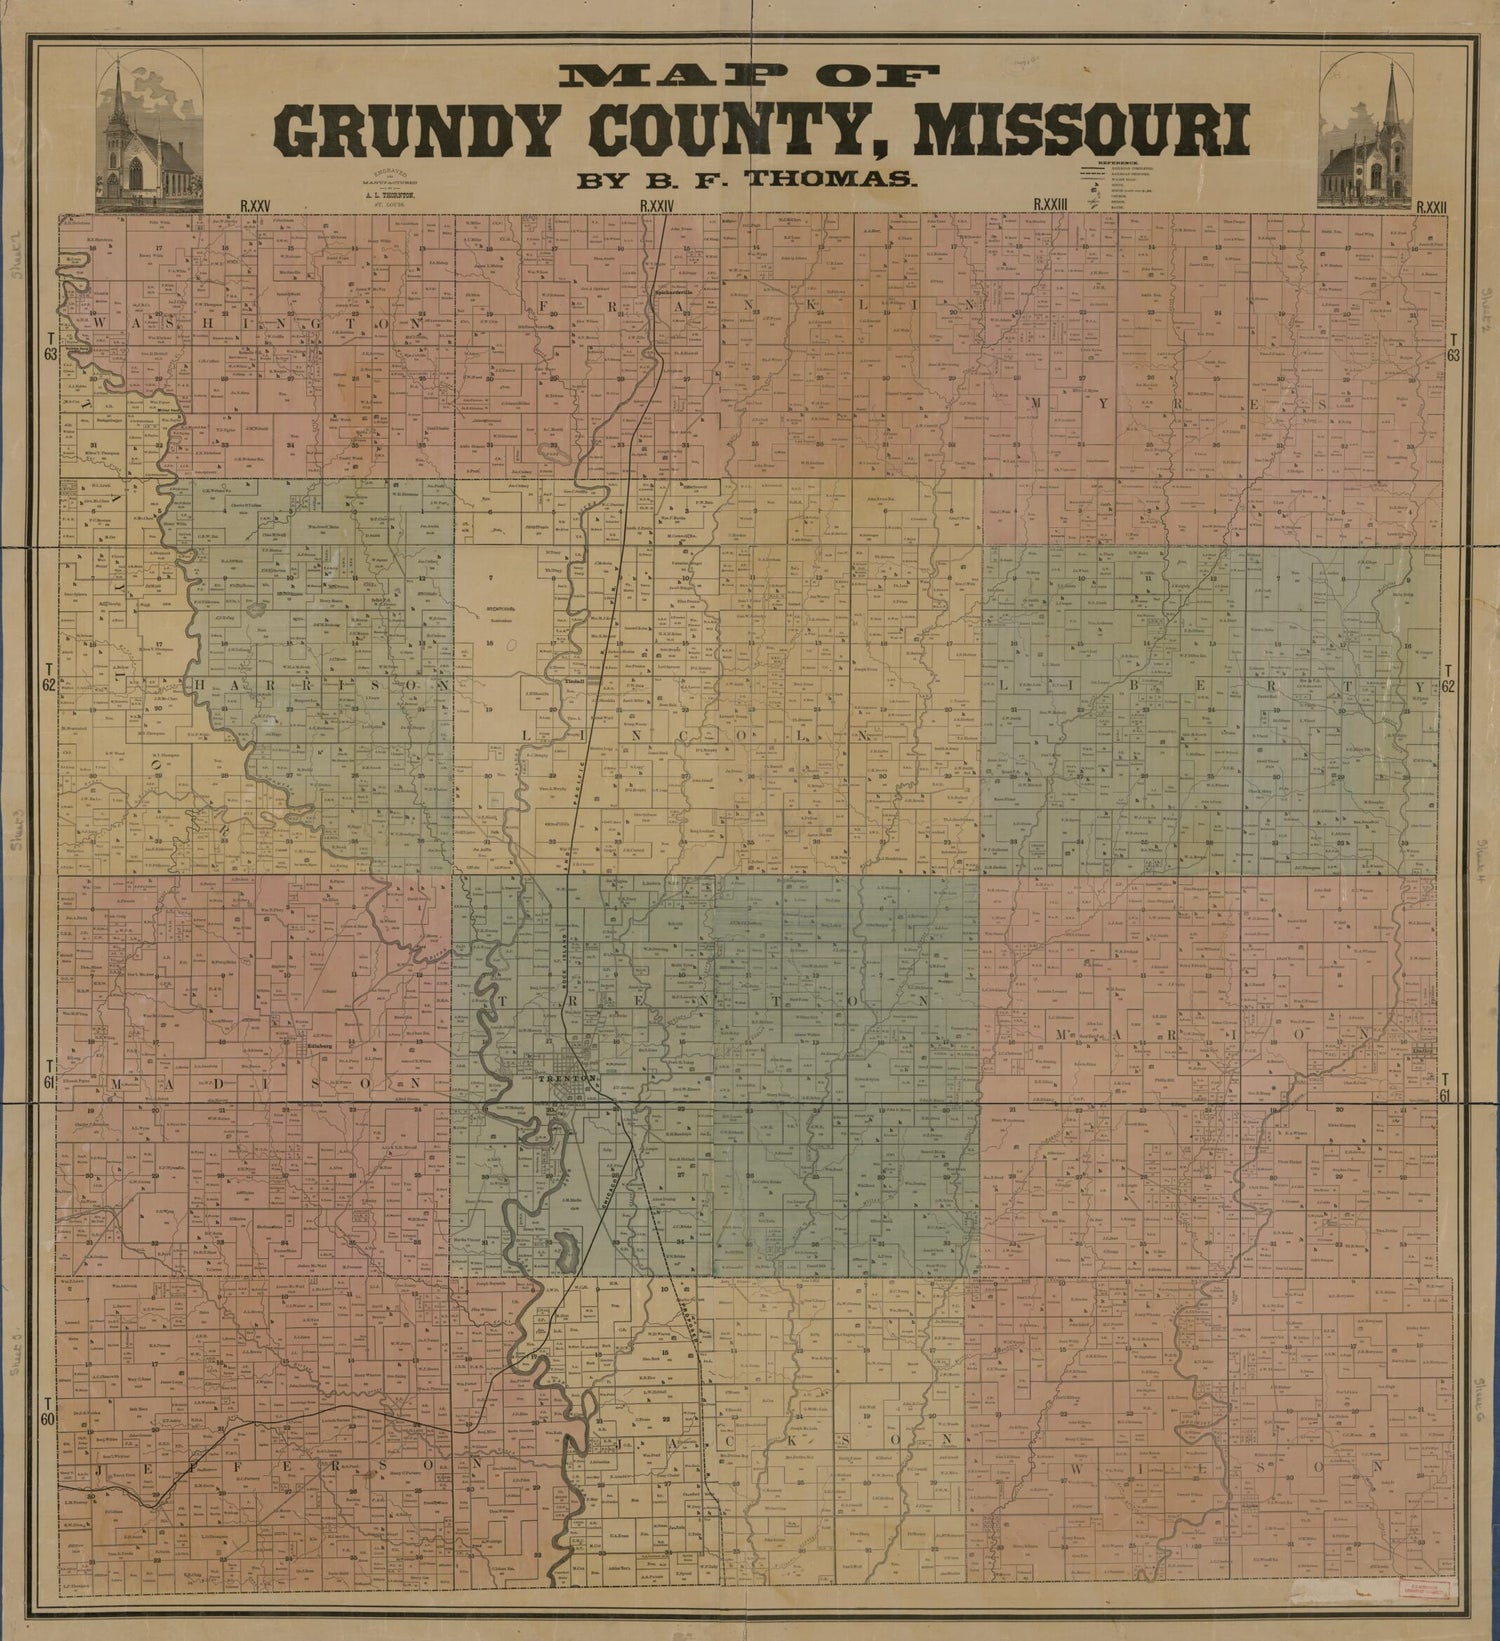 This old map of Map of Gundy County, Missouri from 1890 was created by B. F. Thomas in 1890